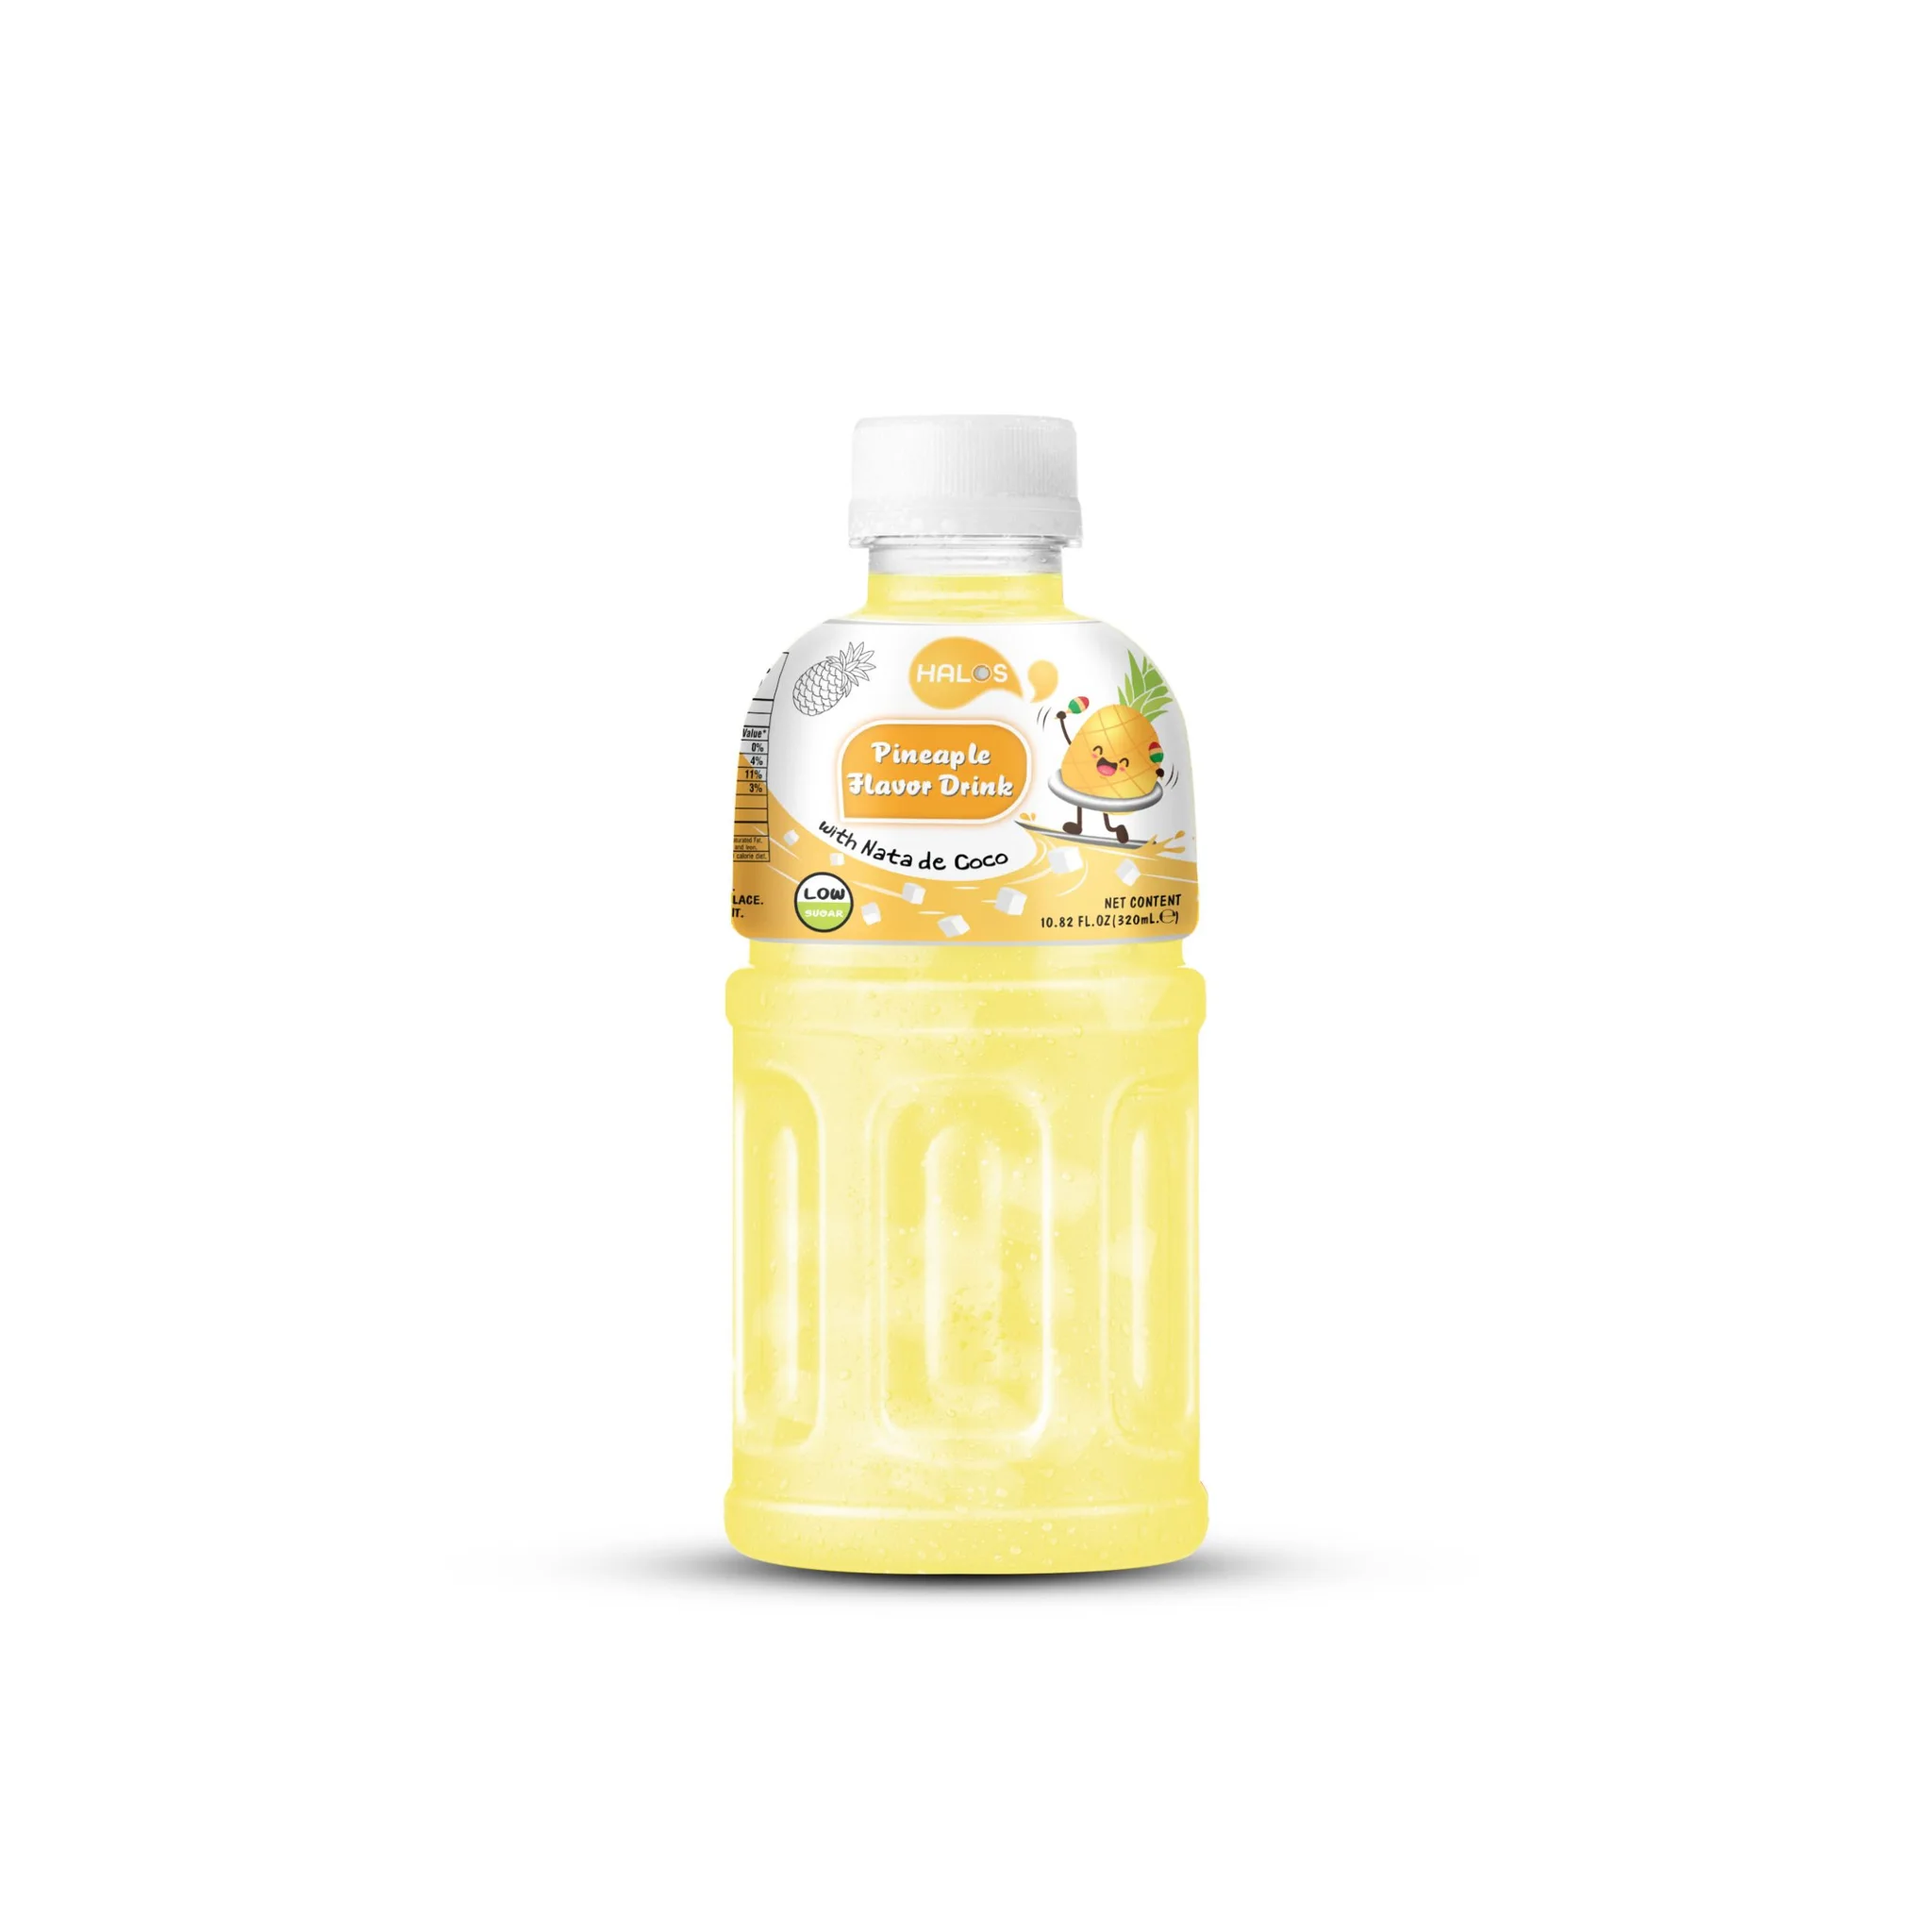 Halos/OEM Nata De Coco Drink With Pineapple Flavor In 330ml Can 